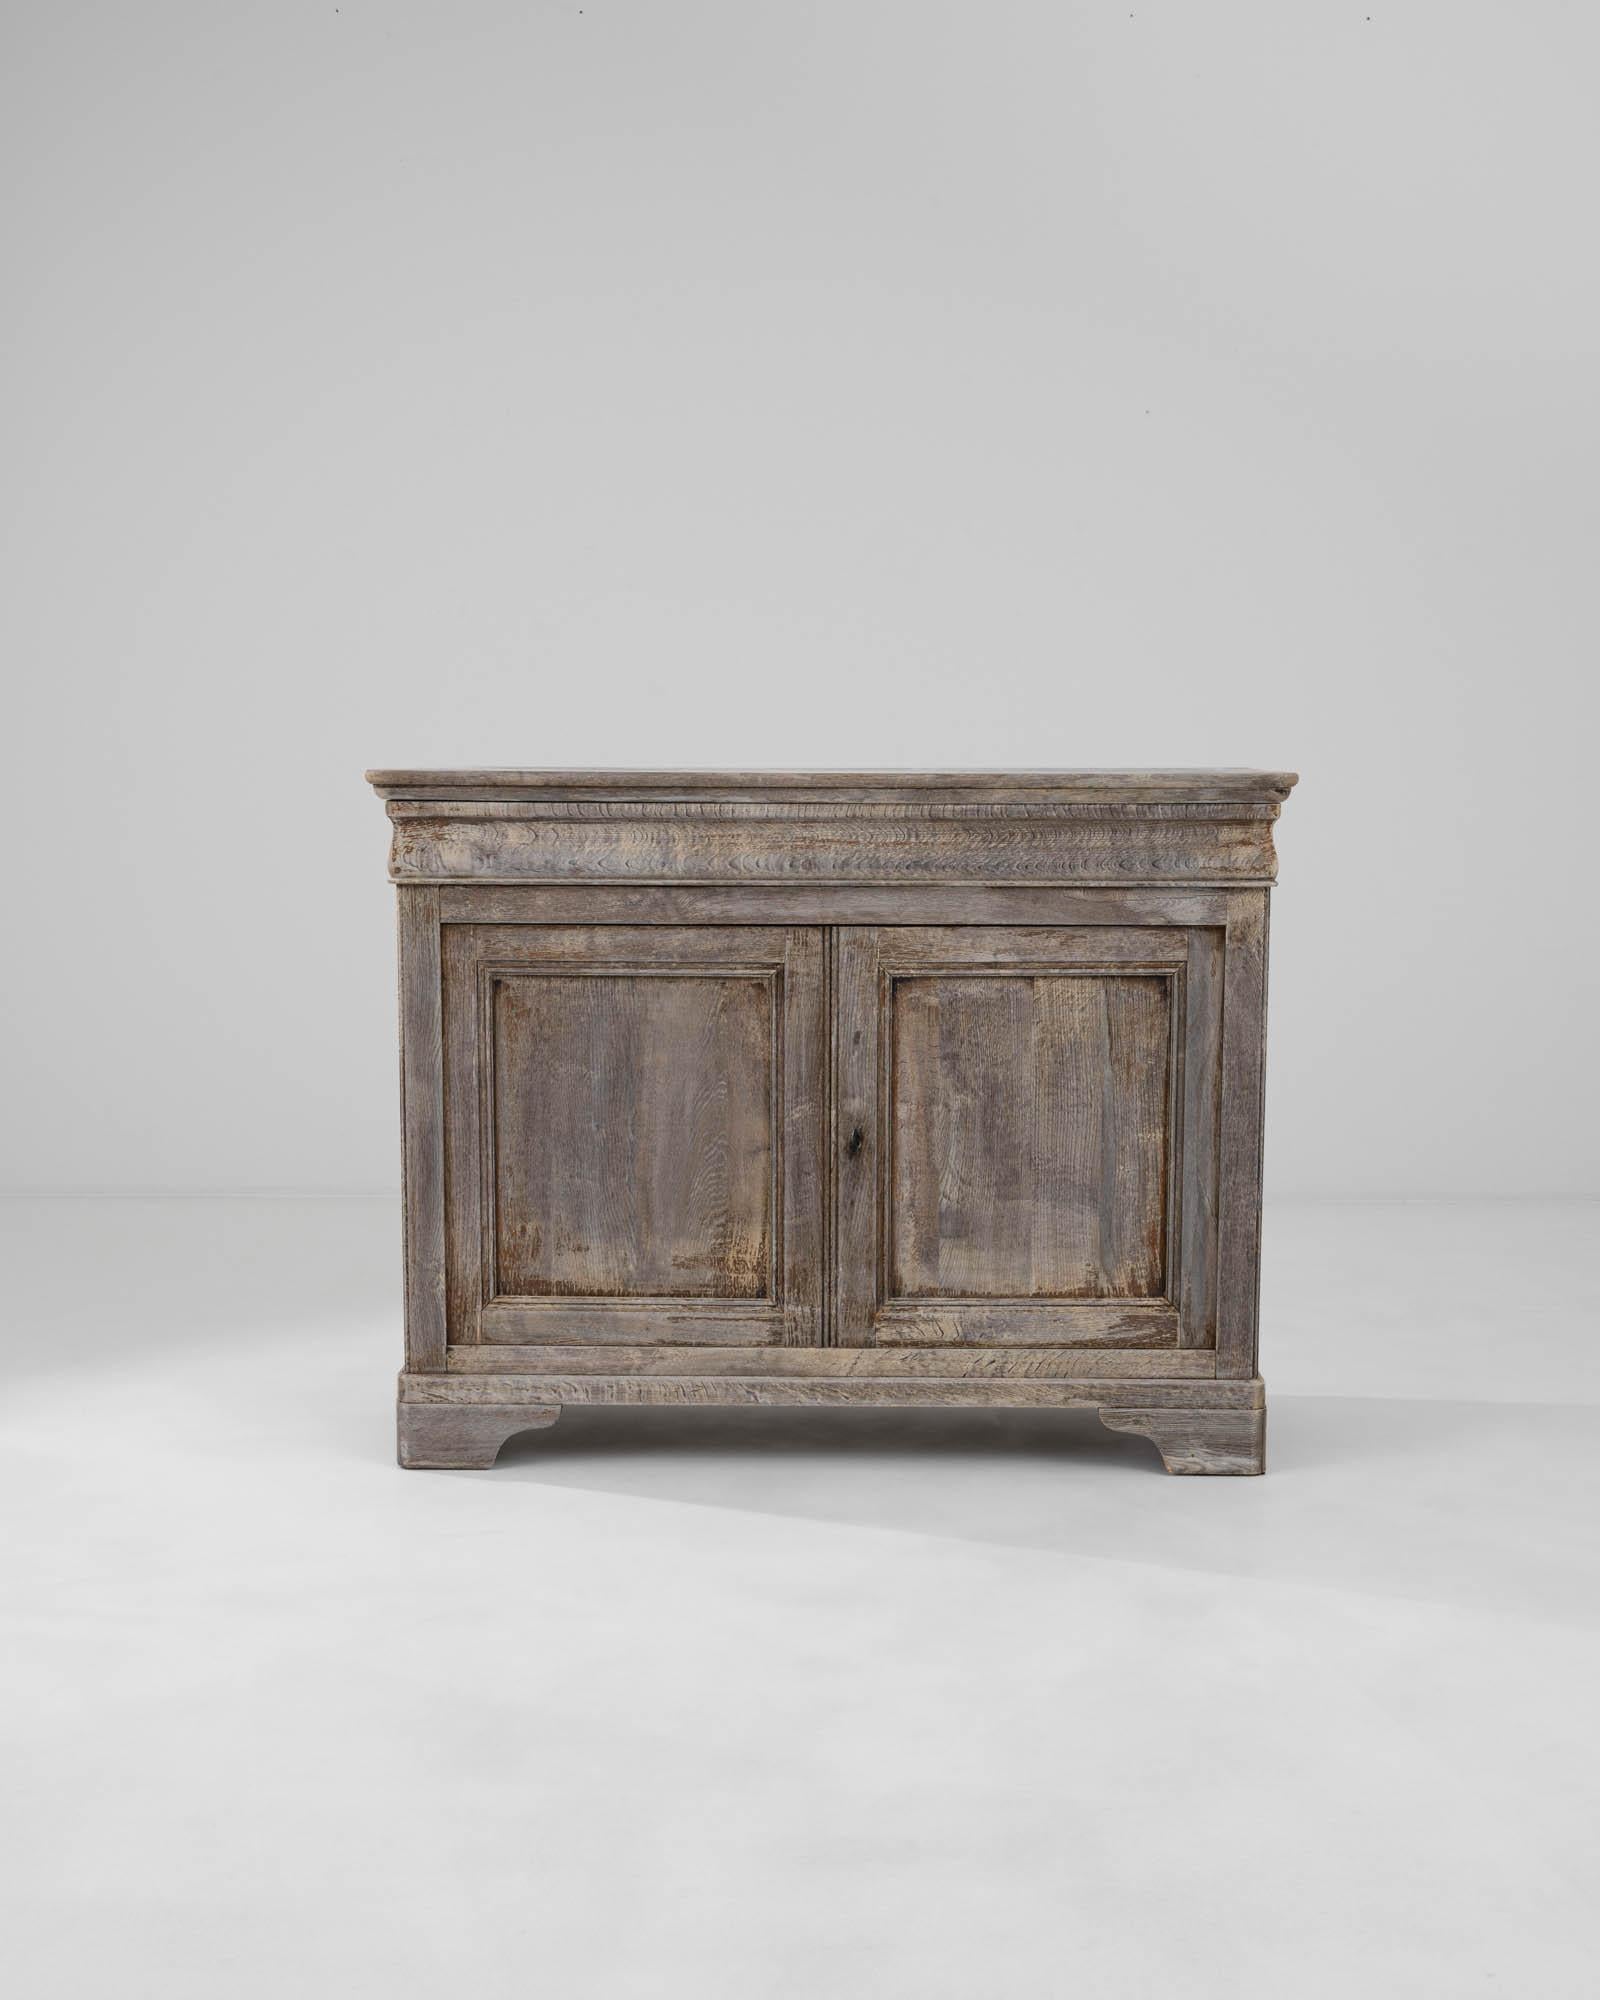 The impeccable geometry of this exquisite buffet is enhanced by the masterfully carved square panels on the doors, the sharply angled molded top, and the elegant ogee bracket feet that contribute to its refined profile. Crafted in France around